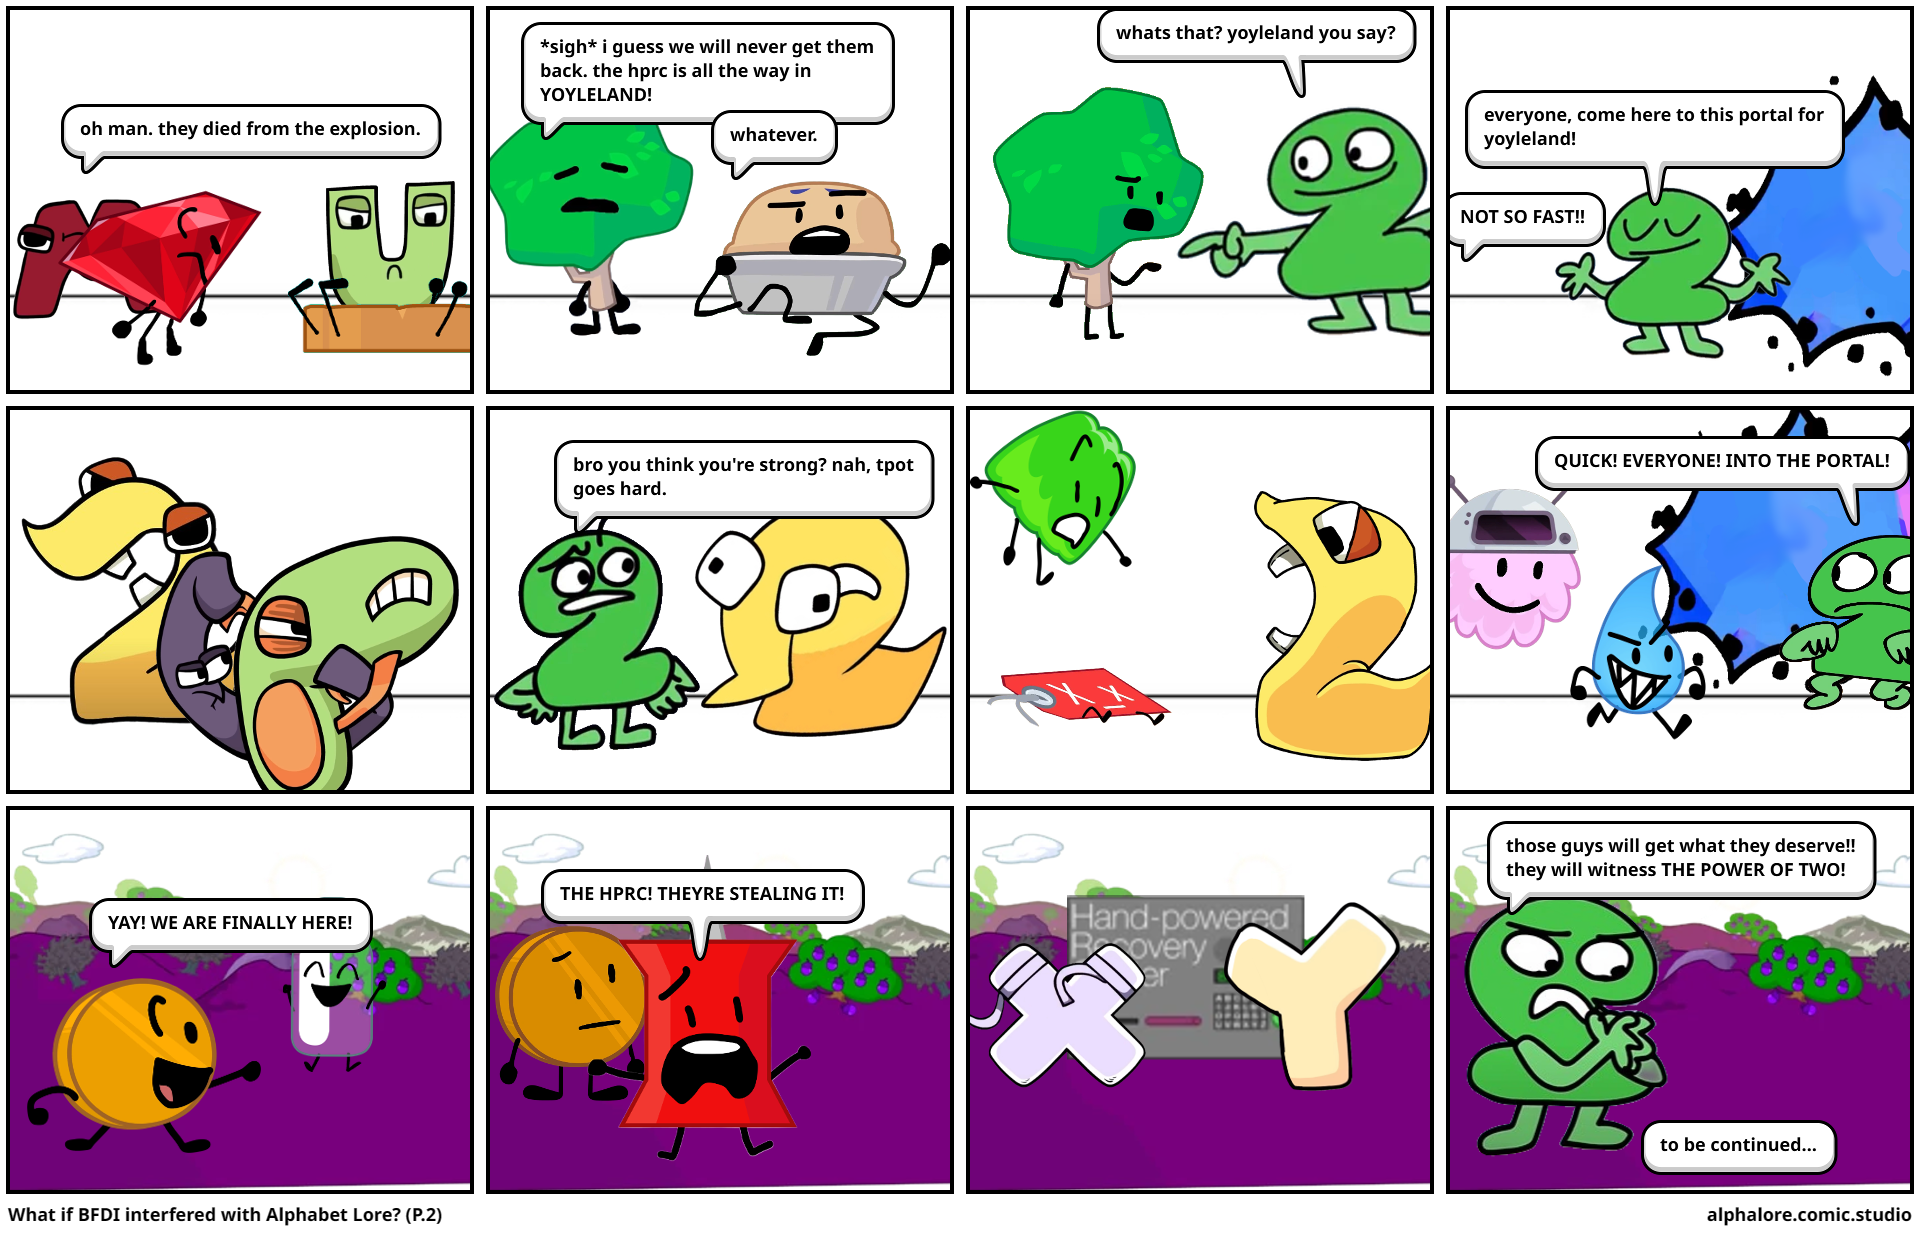 What if BFDI interfered with Alphabet Lore? (P.2)